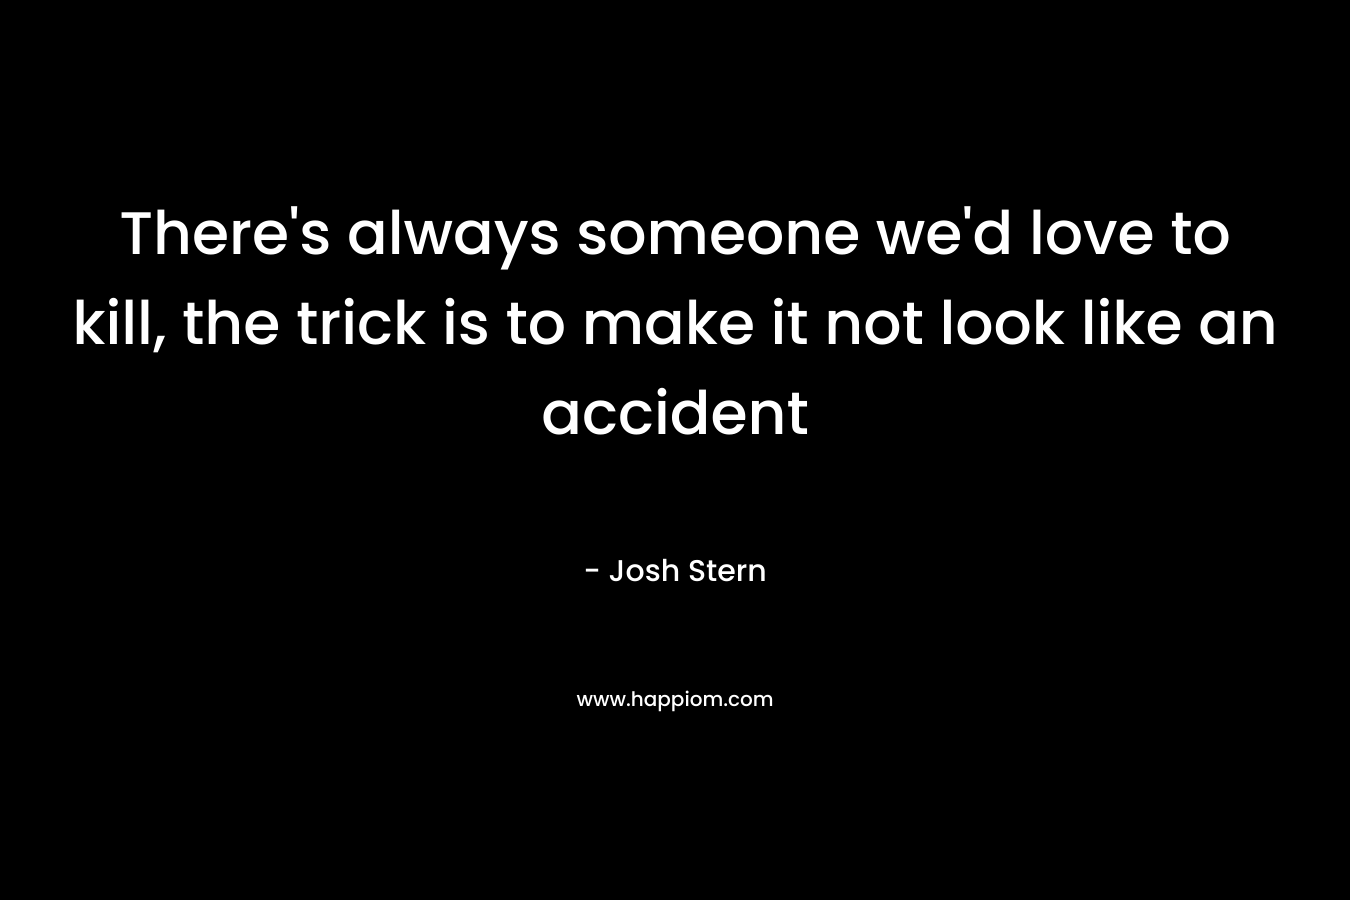 There's always someone we'd love to kill, the trick is to make it not look like an accident